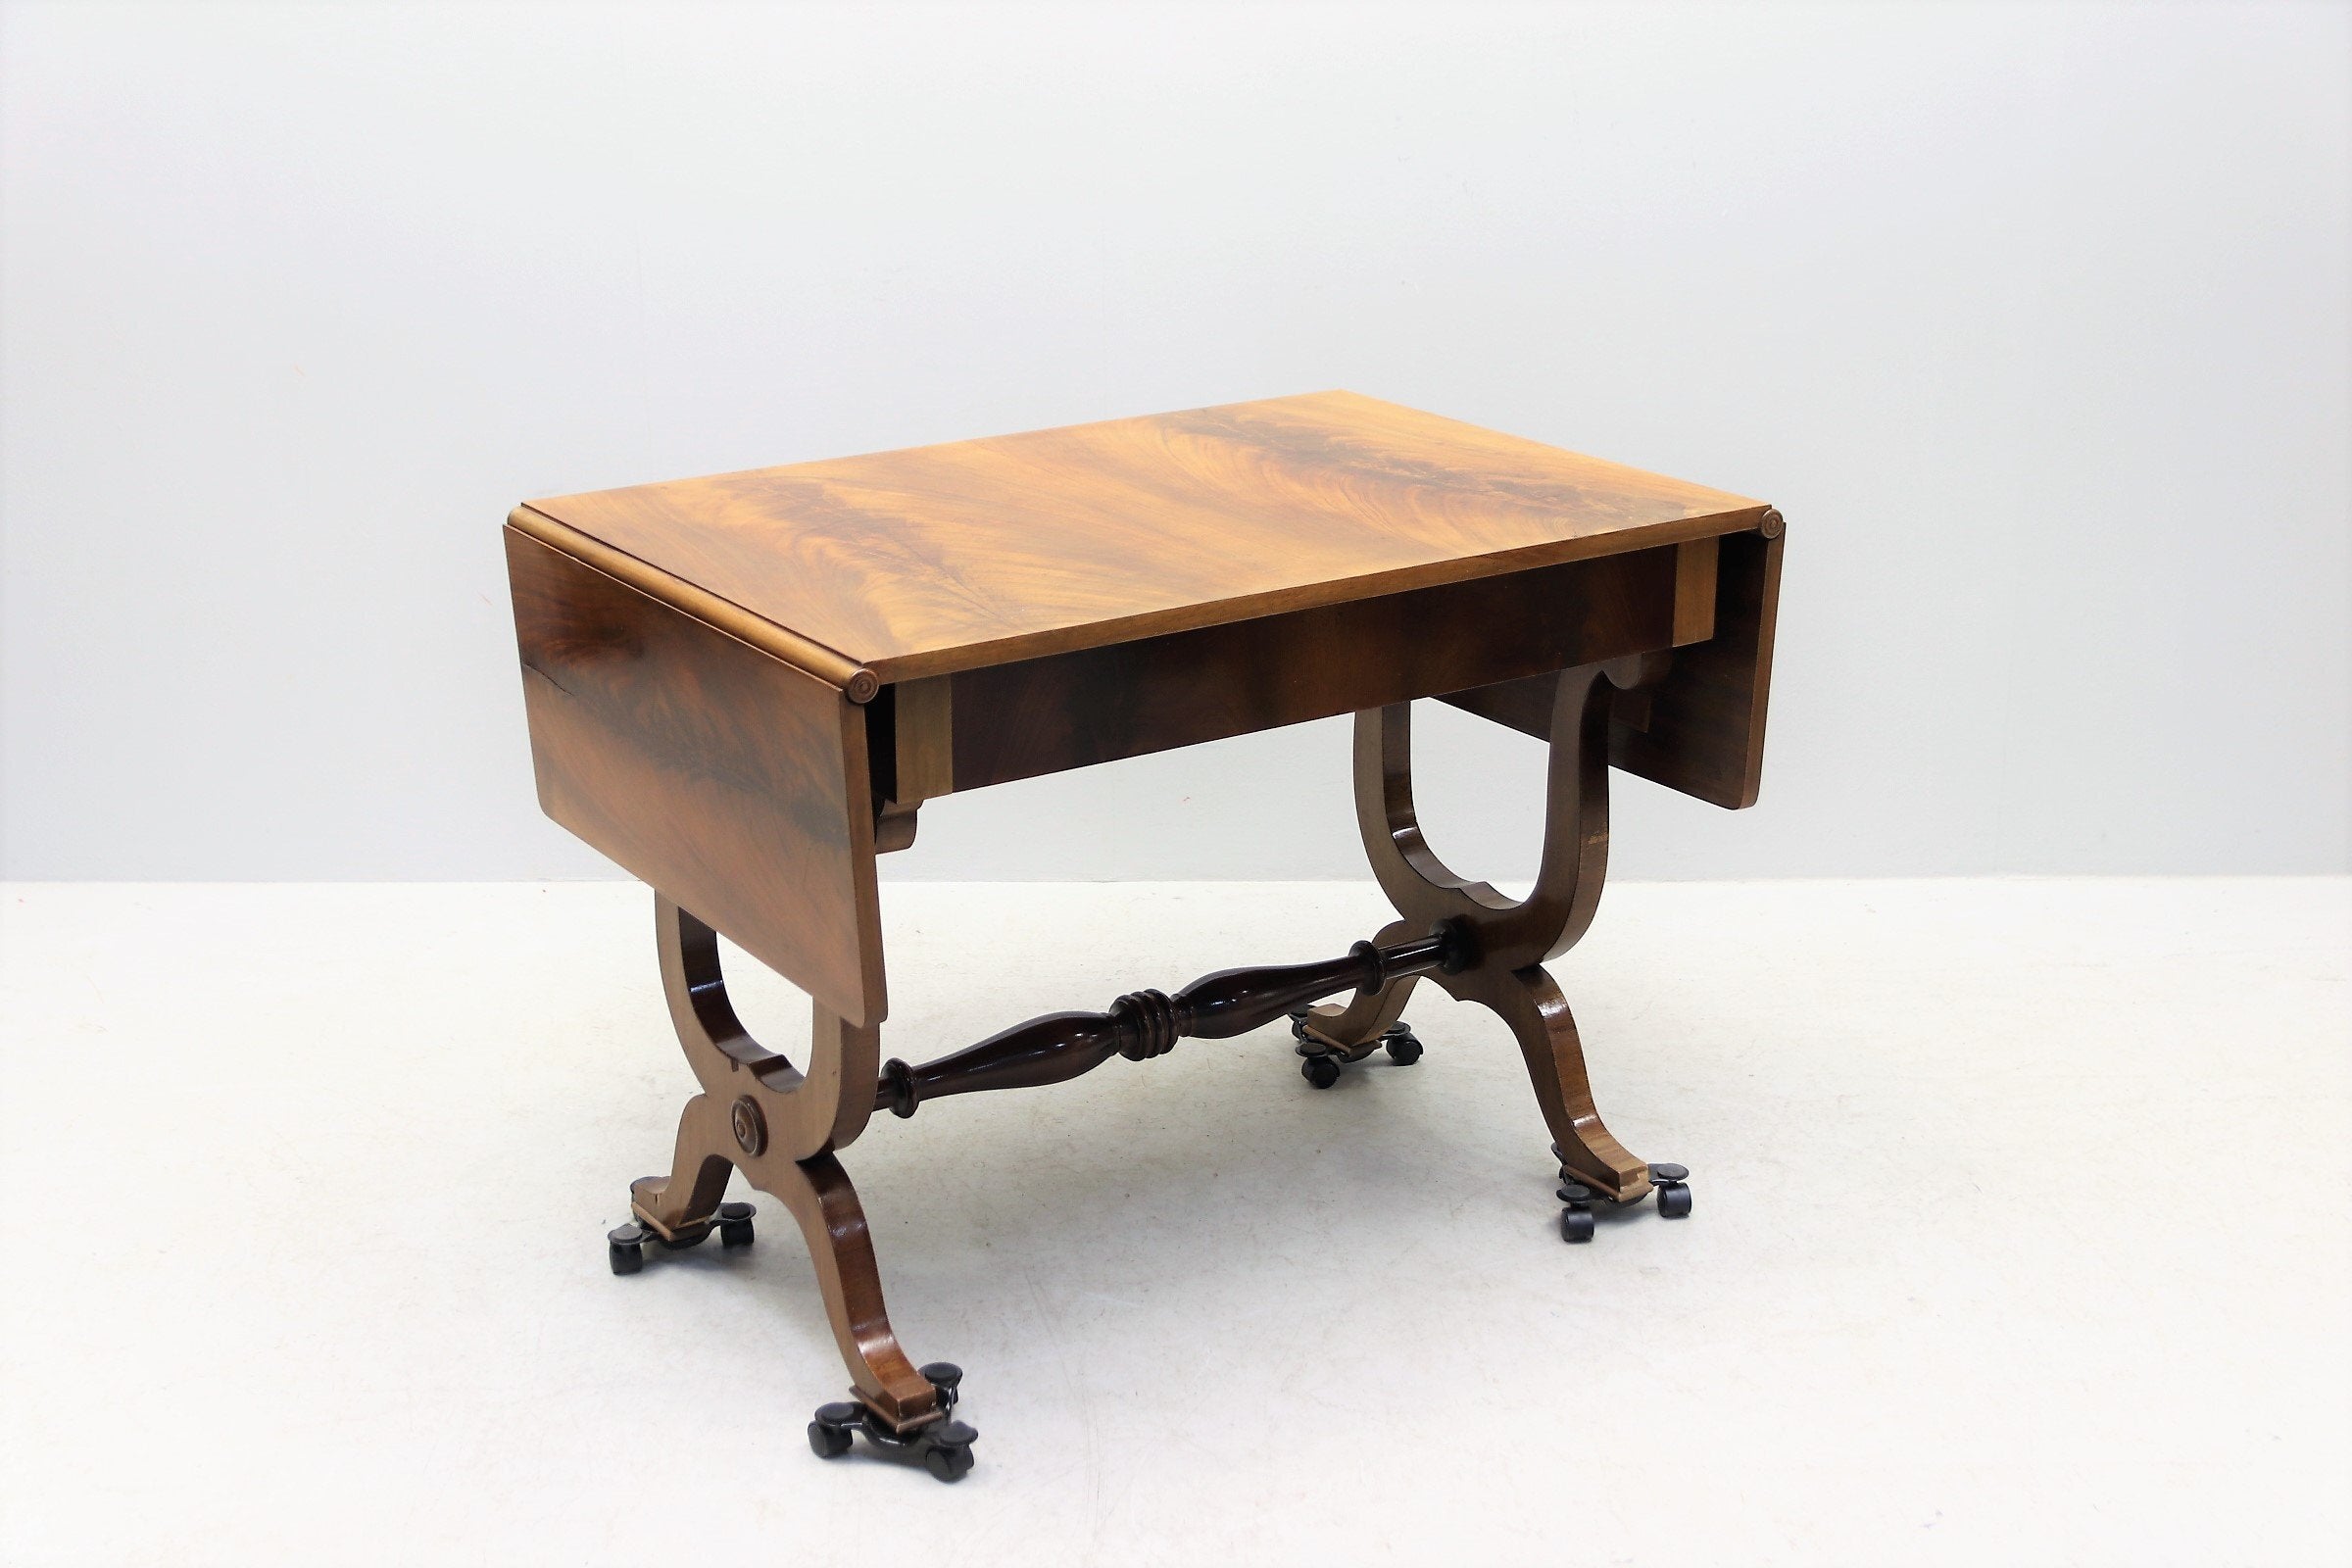 1900s Empire-style Desk with Gorgeous Veneer Wood Grain Detail & Graceful Carved Legs